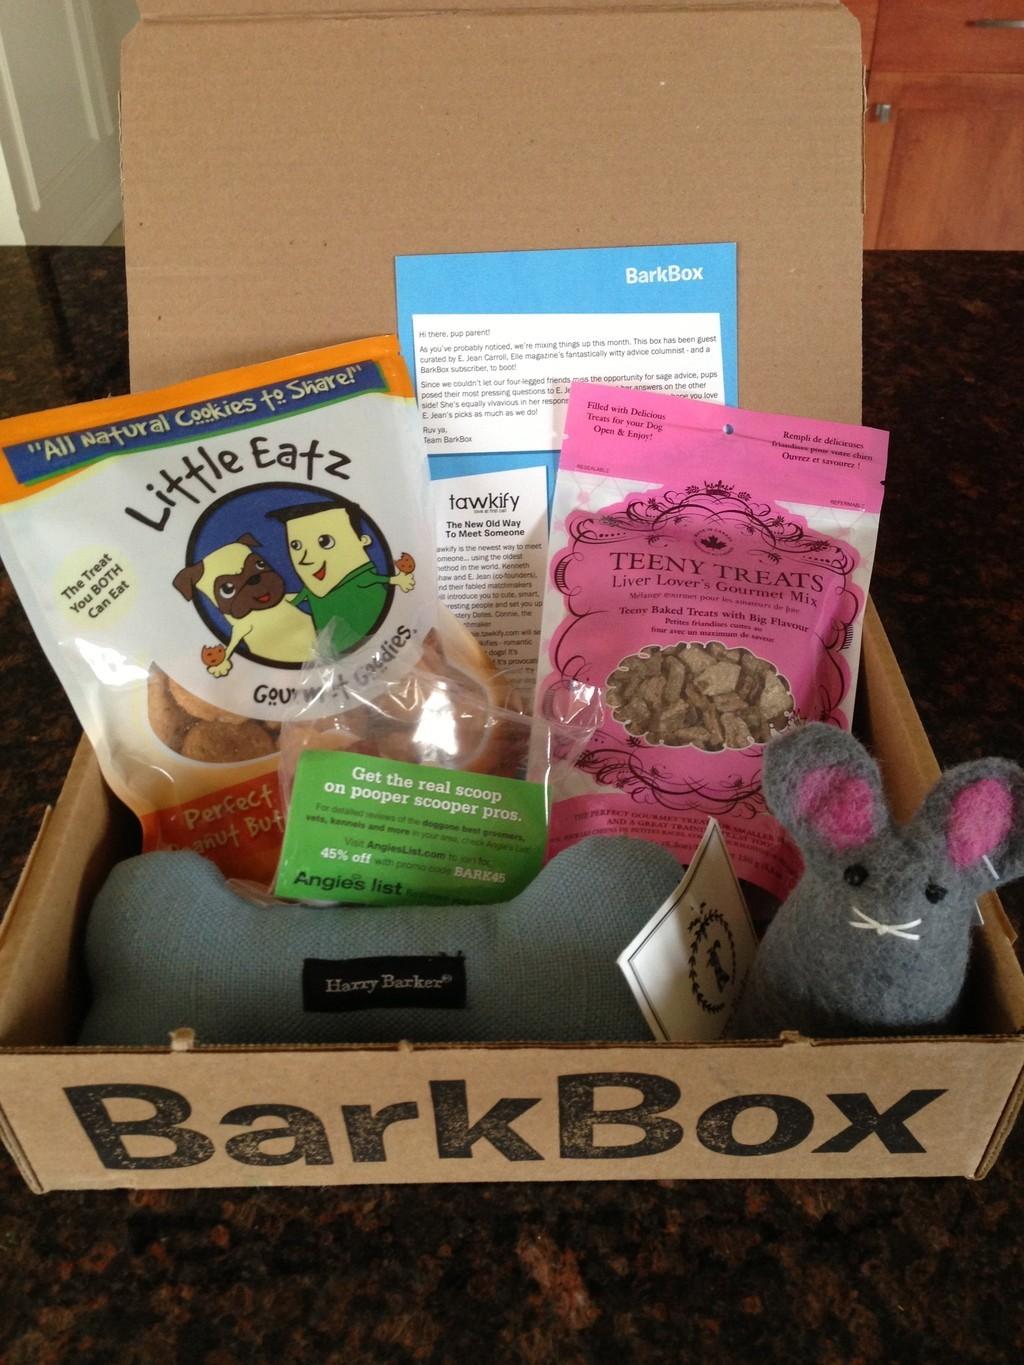 BarkBox Review + Coupon Code – March 2013